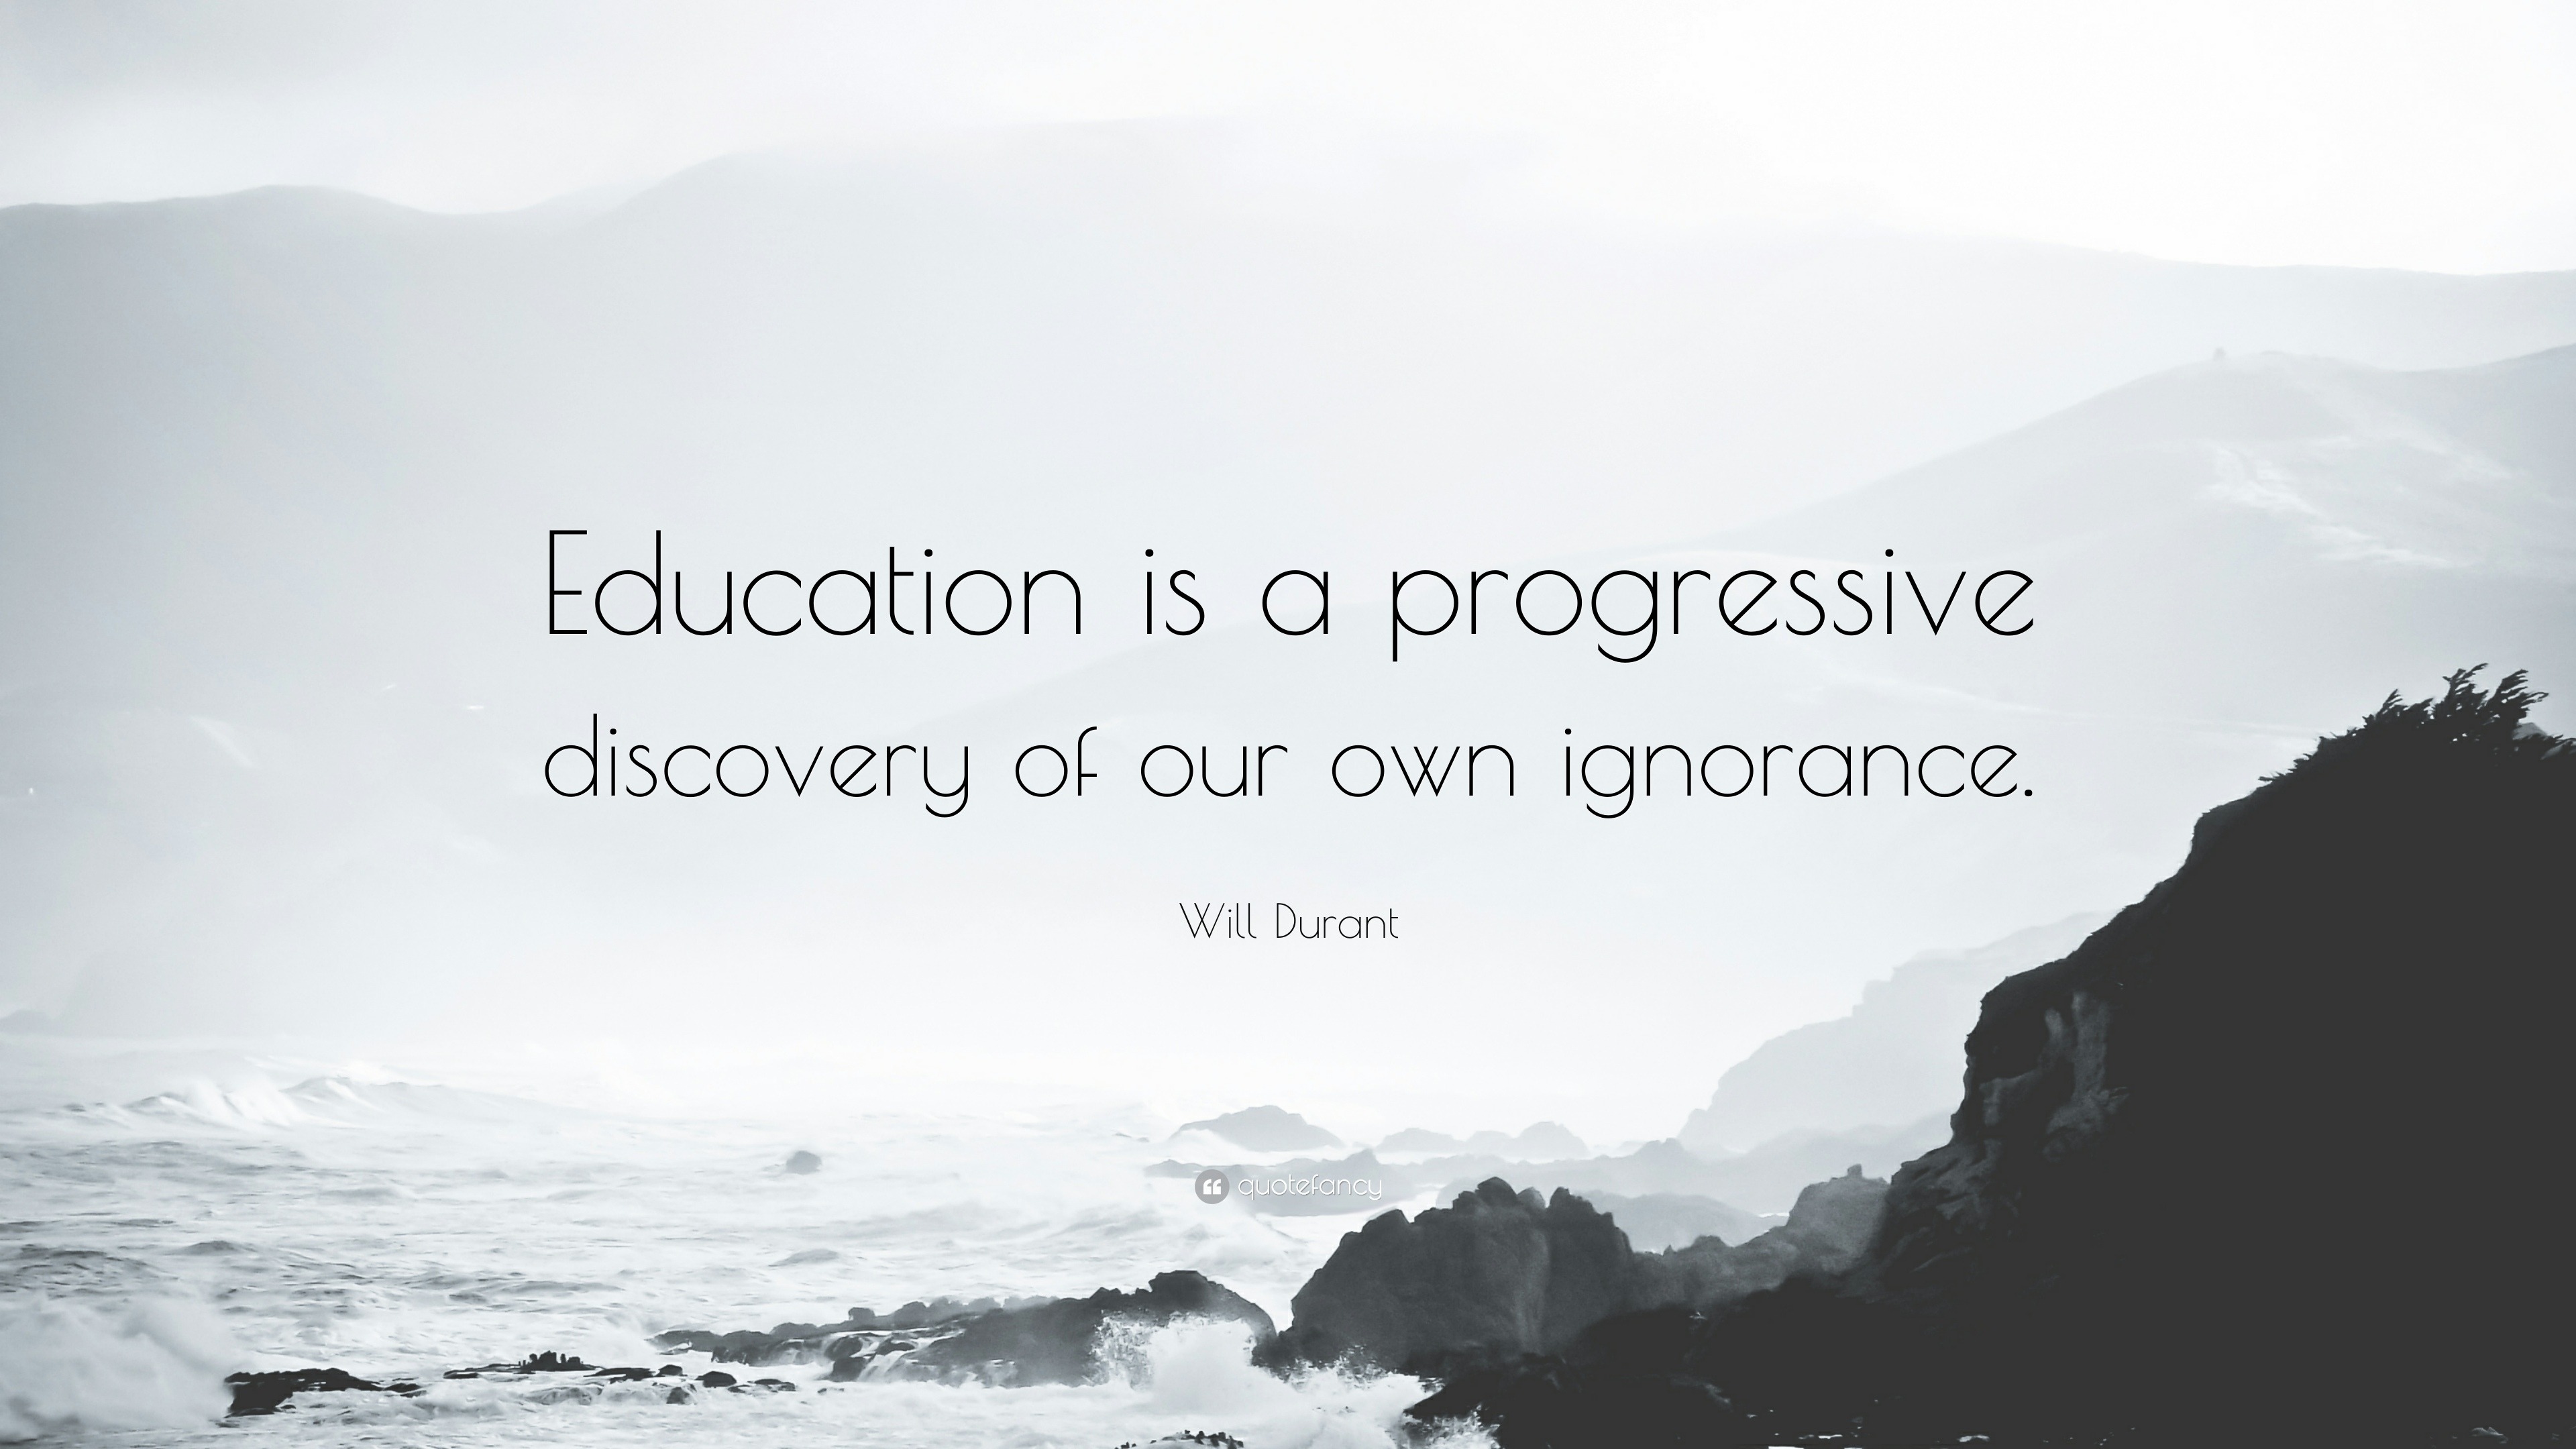 education is a progressive discovery of our ignorance